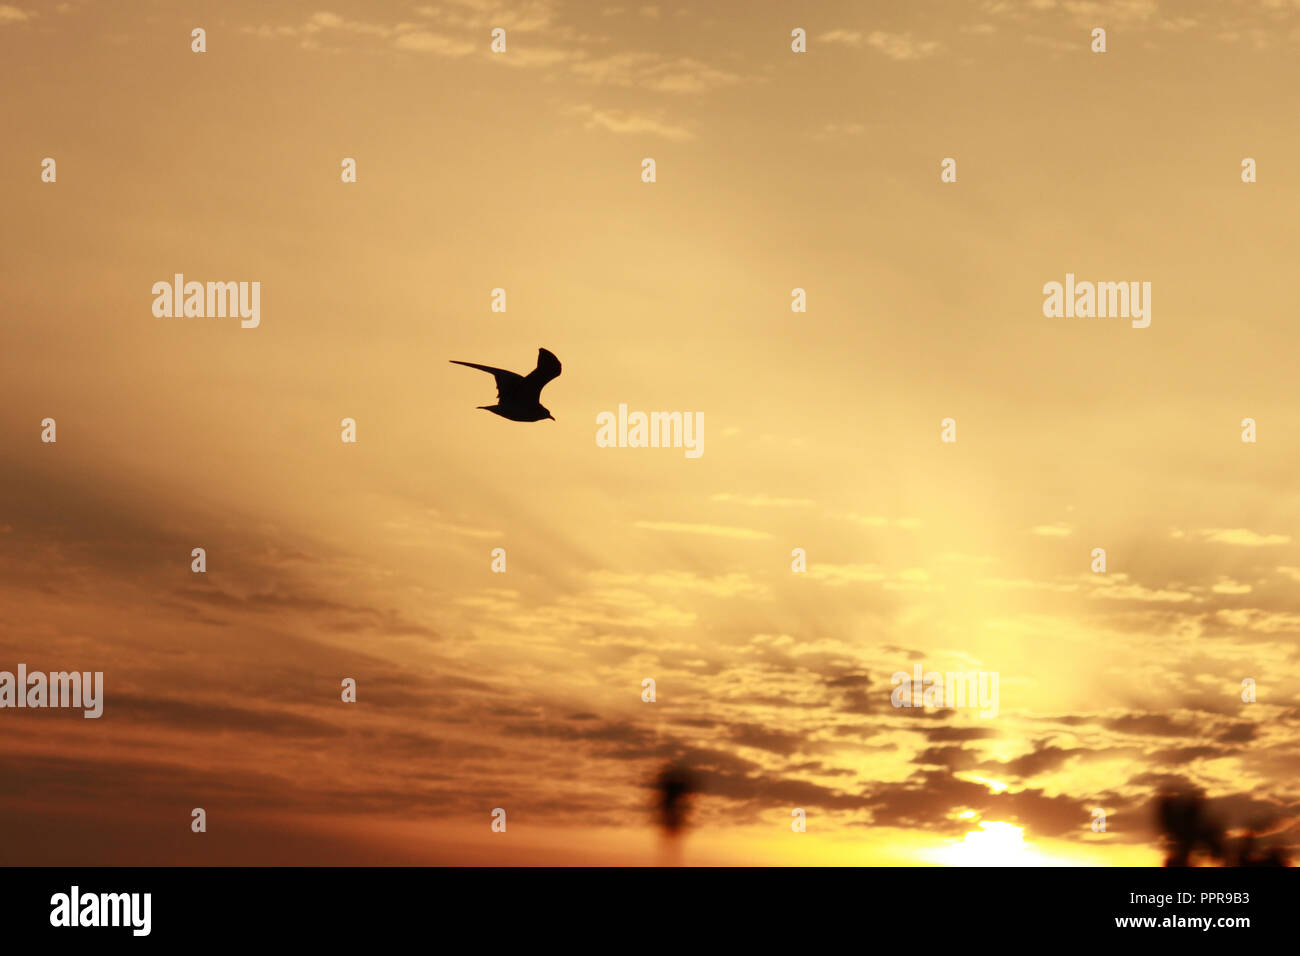 Silhouette of bird flying in the sunset sky, Weymouth. Stock Photo